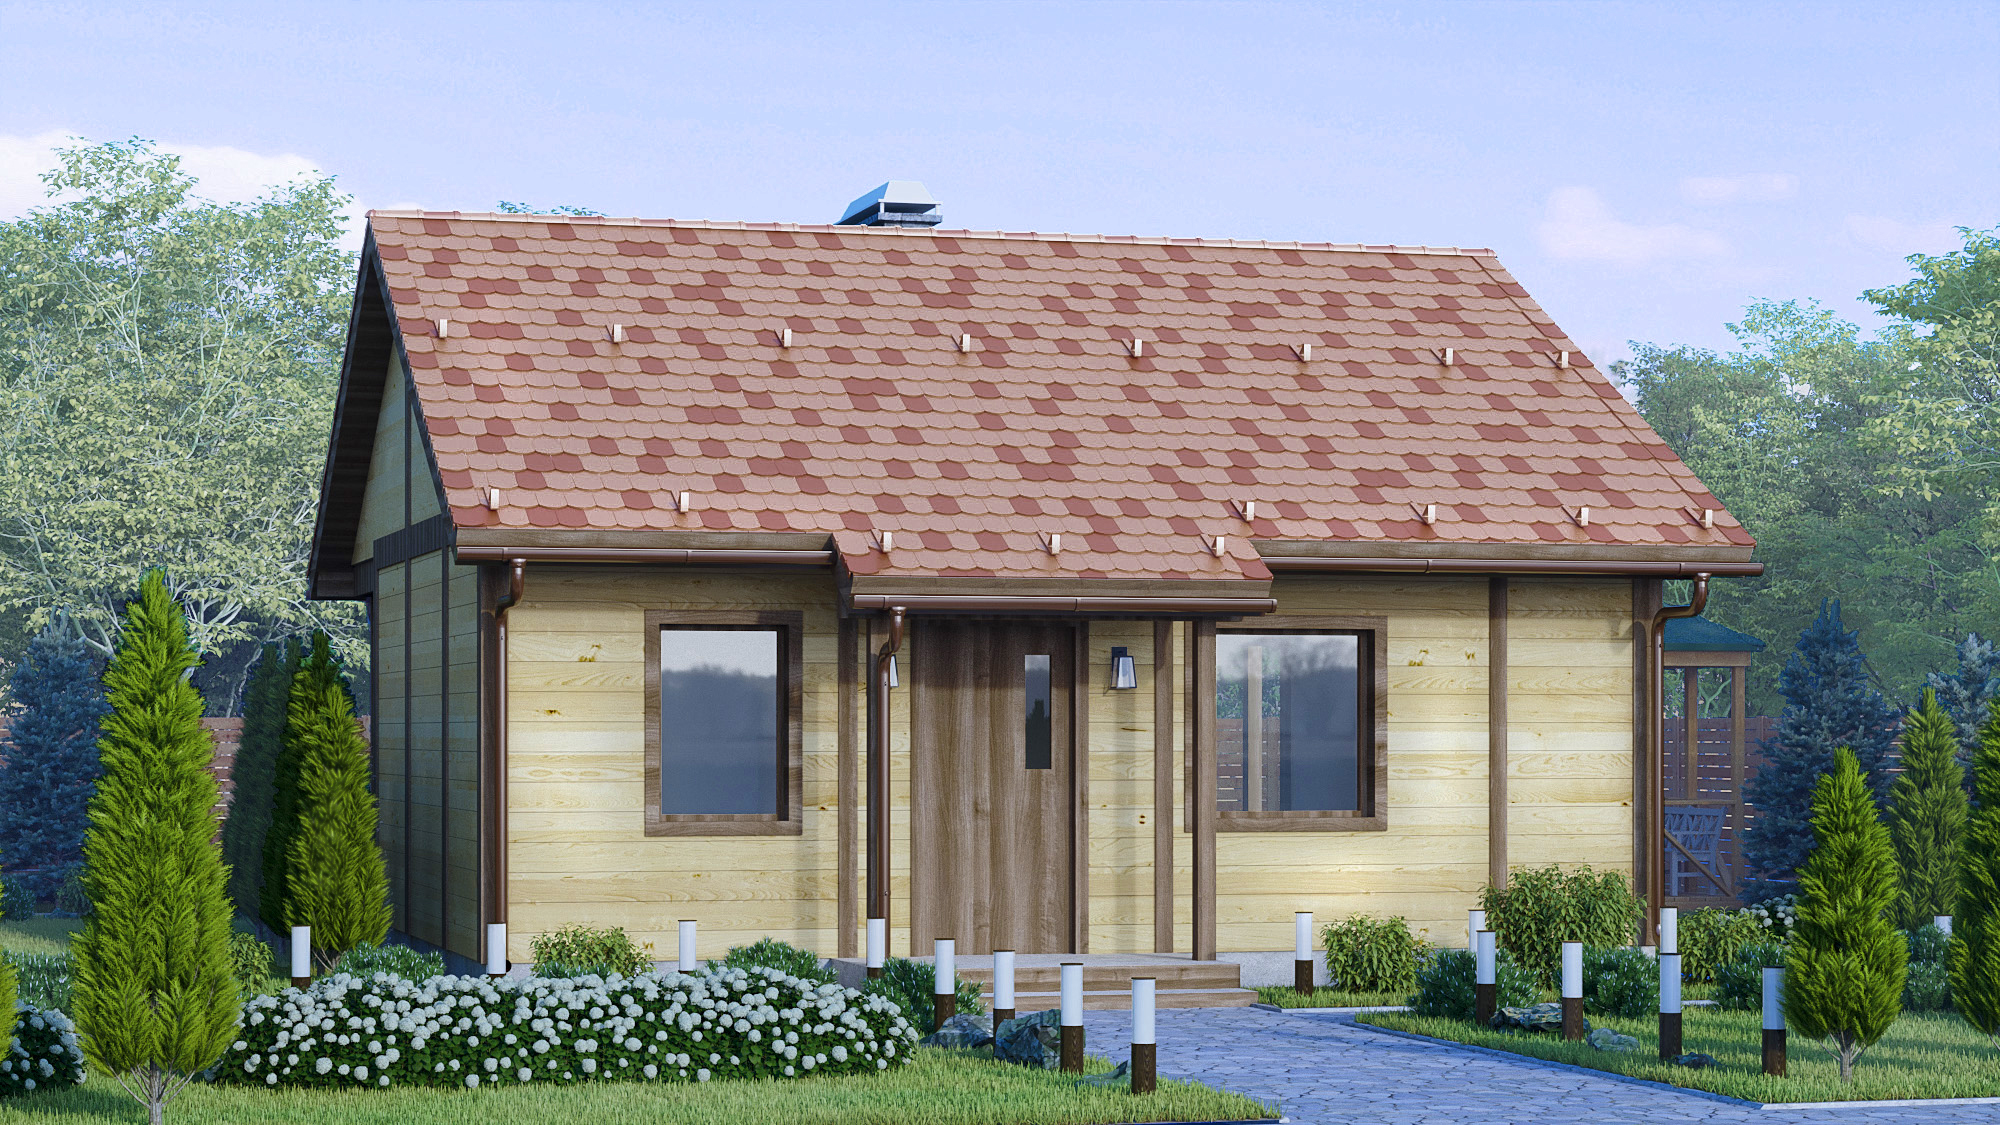 Visualization of a country house. in 3d max corona render image